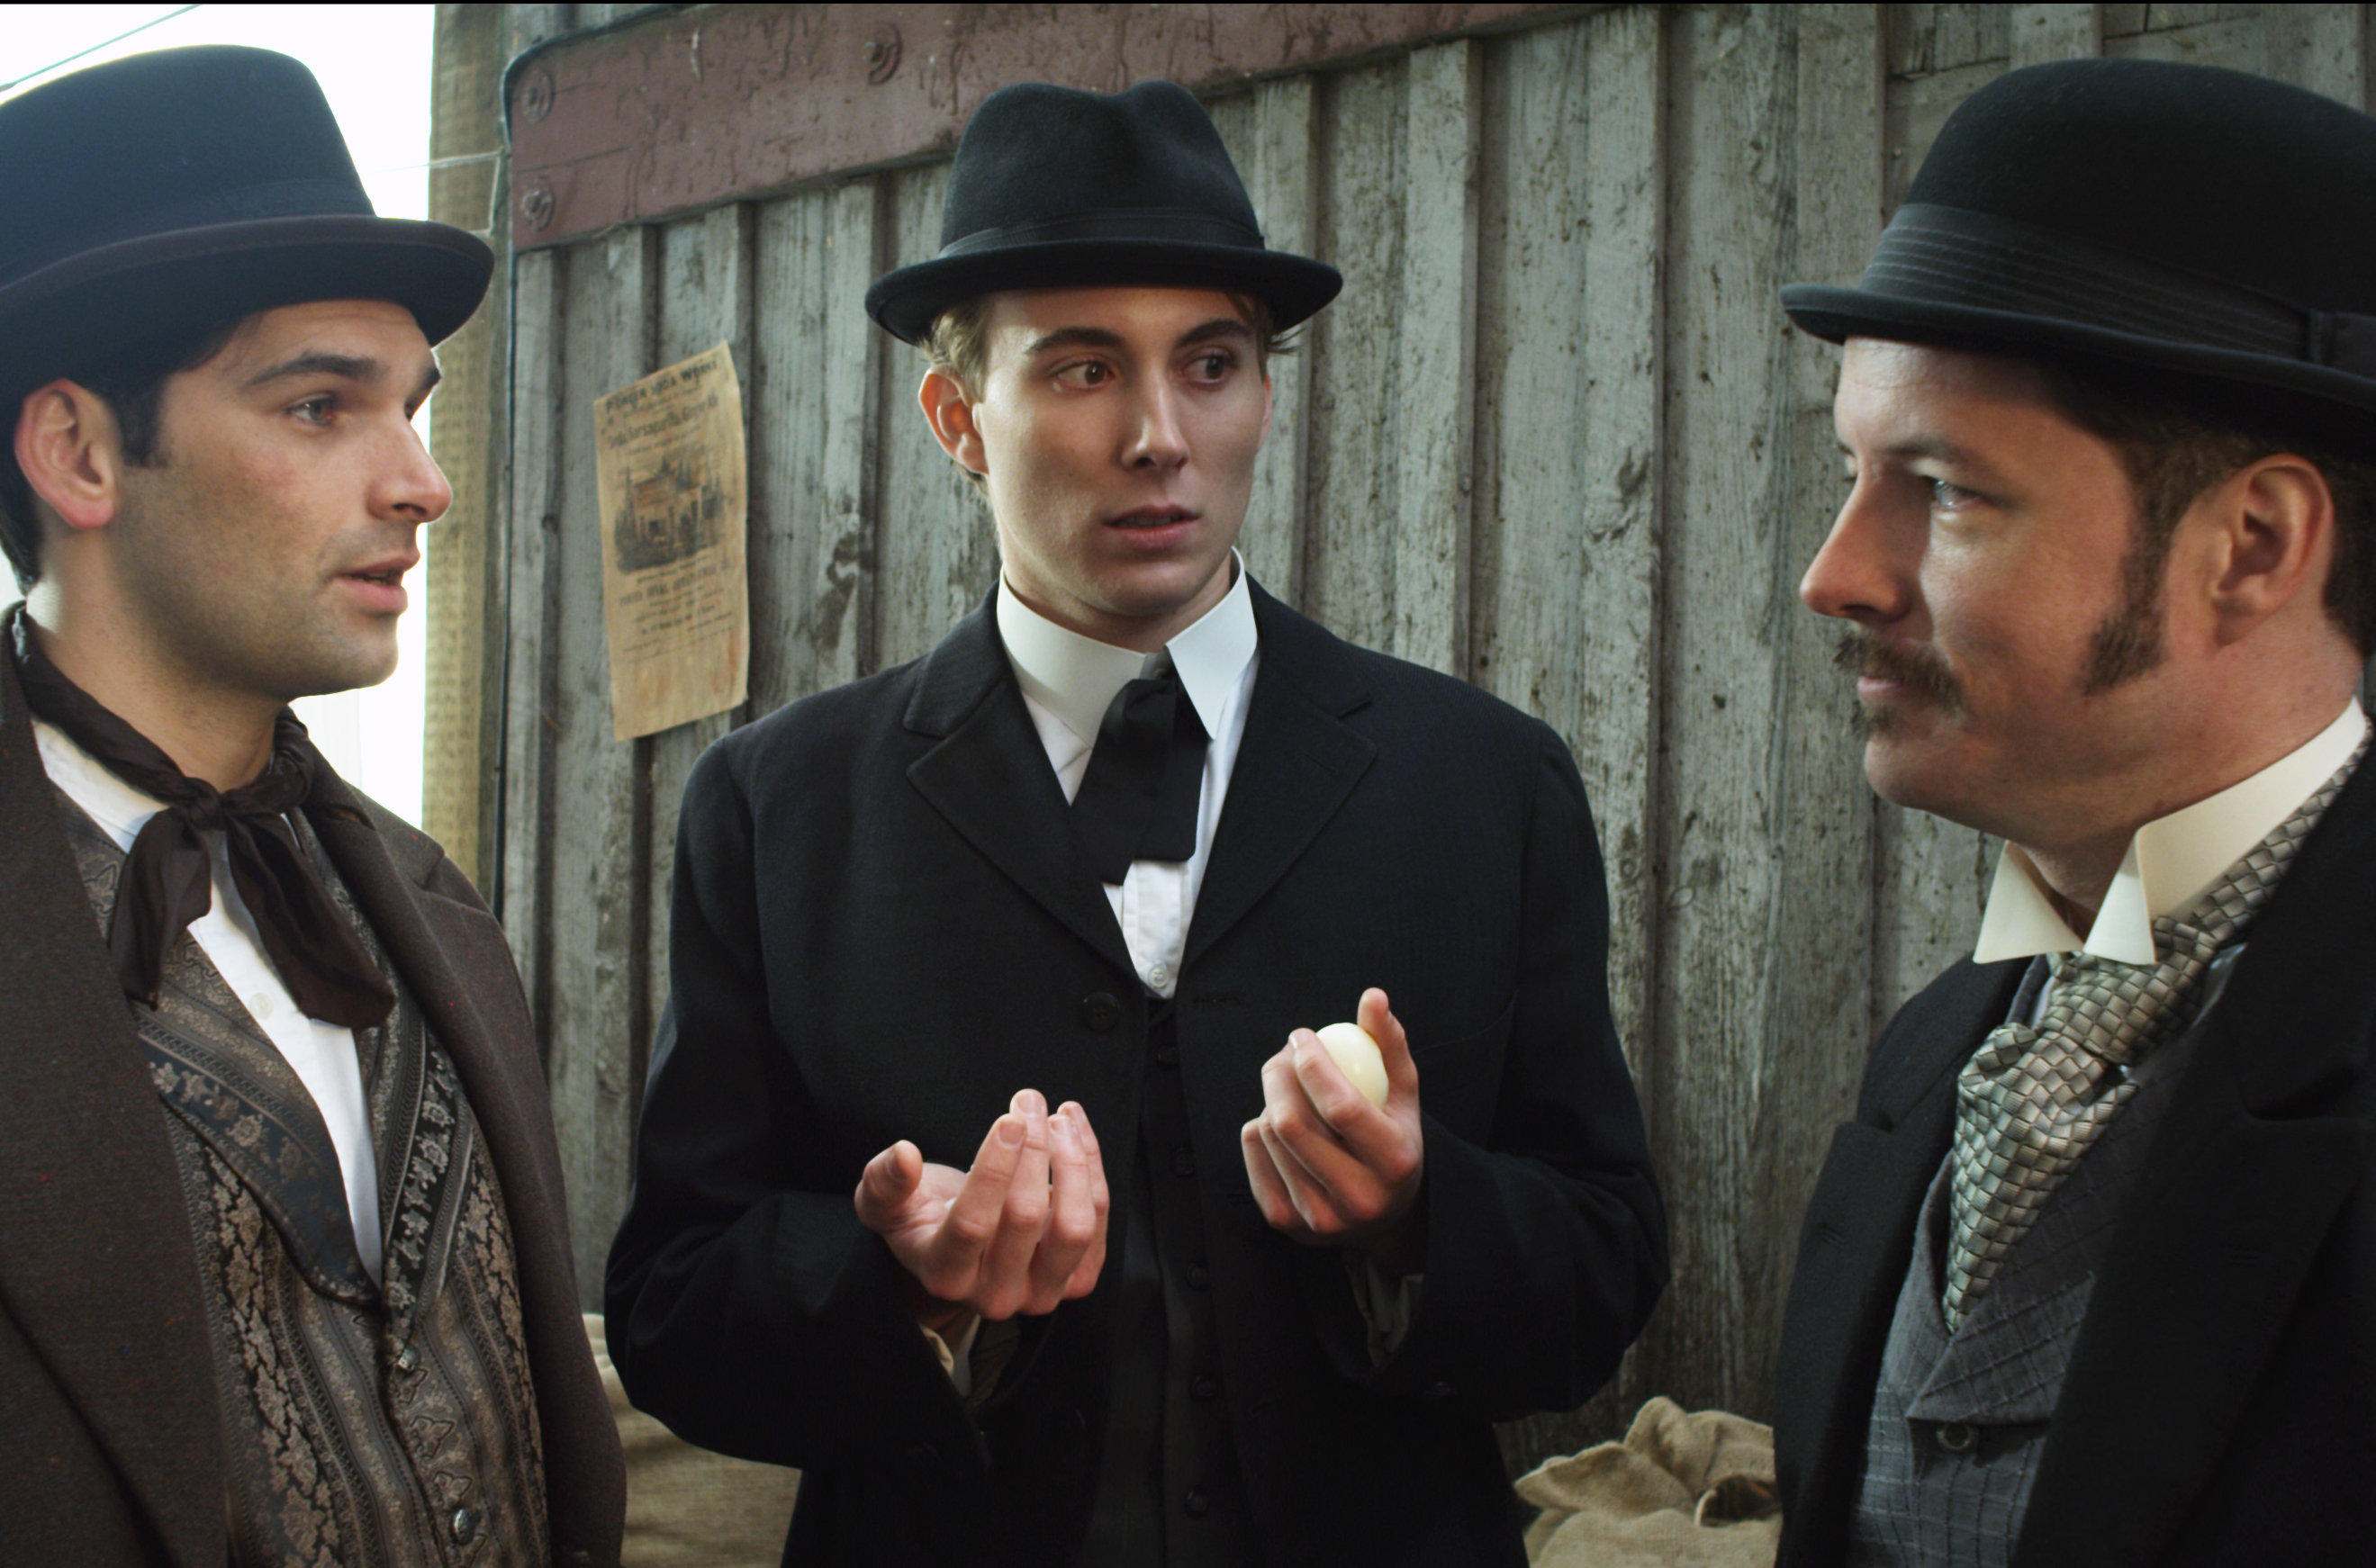 Roger Ainslie, Donal Thoms-Cappello and Brian Wiles in A Person Known to Me: Parcel No. 5 - A Thrilling Existence (2013)